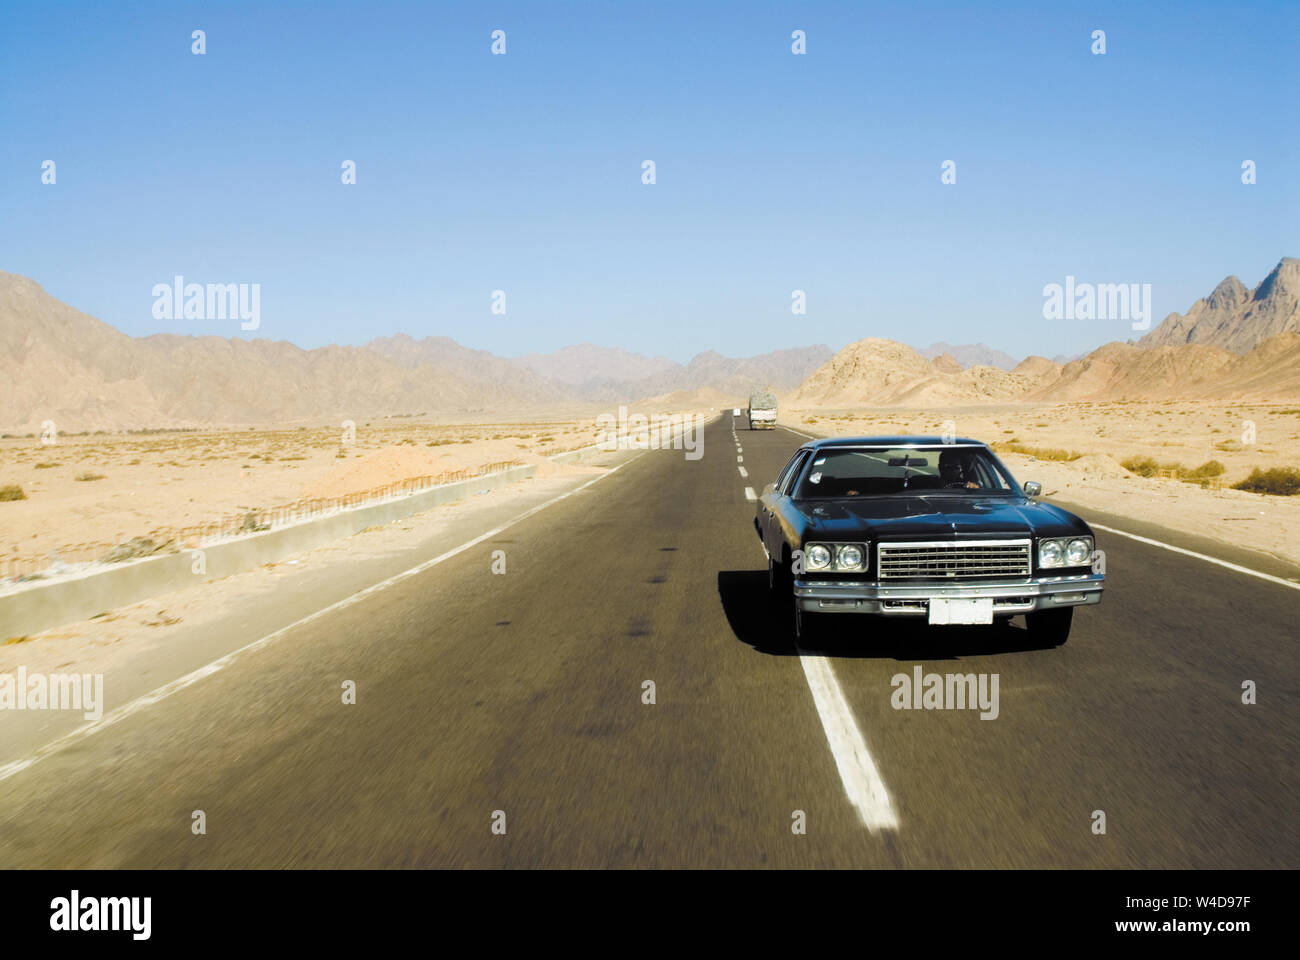 Big black old-fashioned car on a desert highway. Egypt Stock Photo